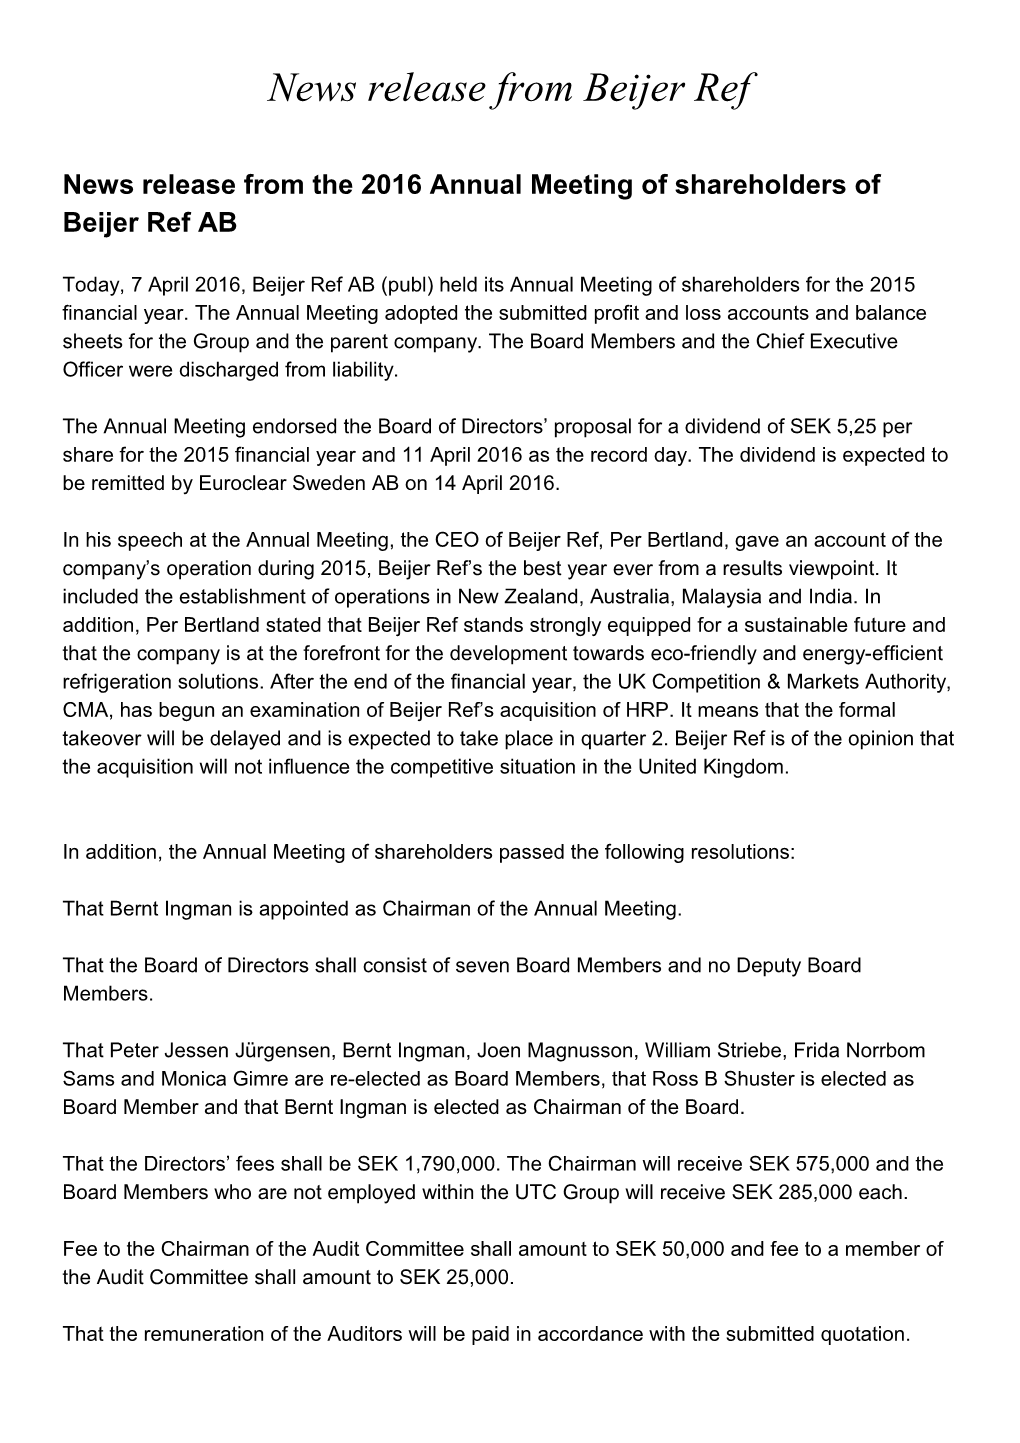 News Release from the 2016 Annual Meeting of Shareholders of Beijer Ref AB